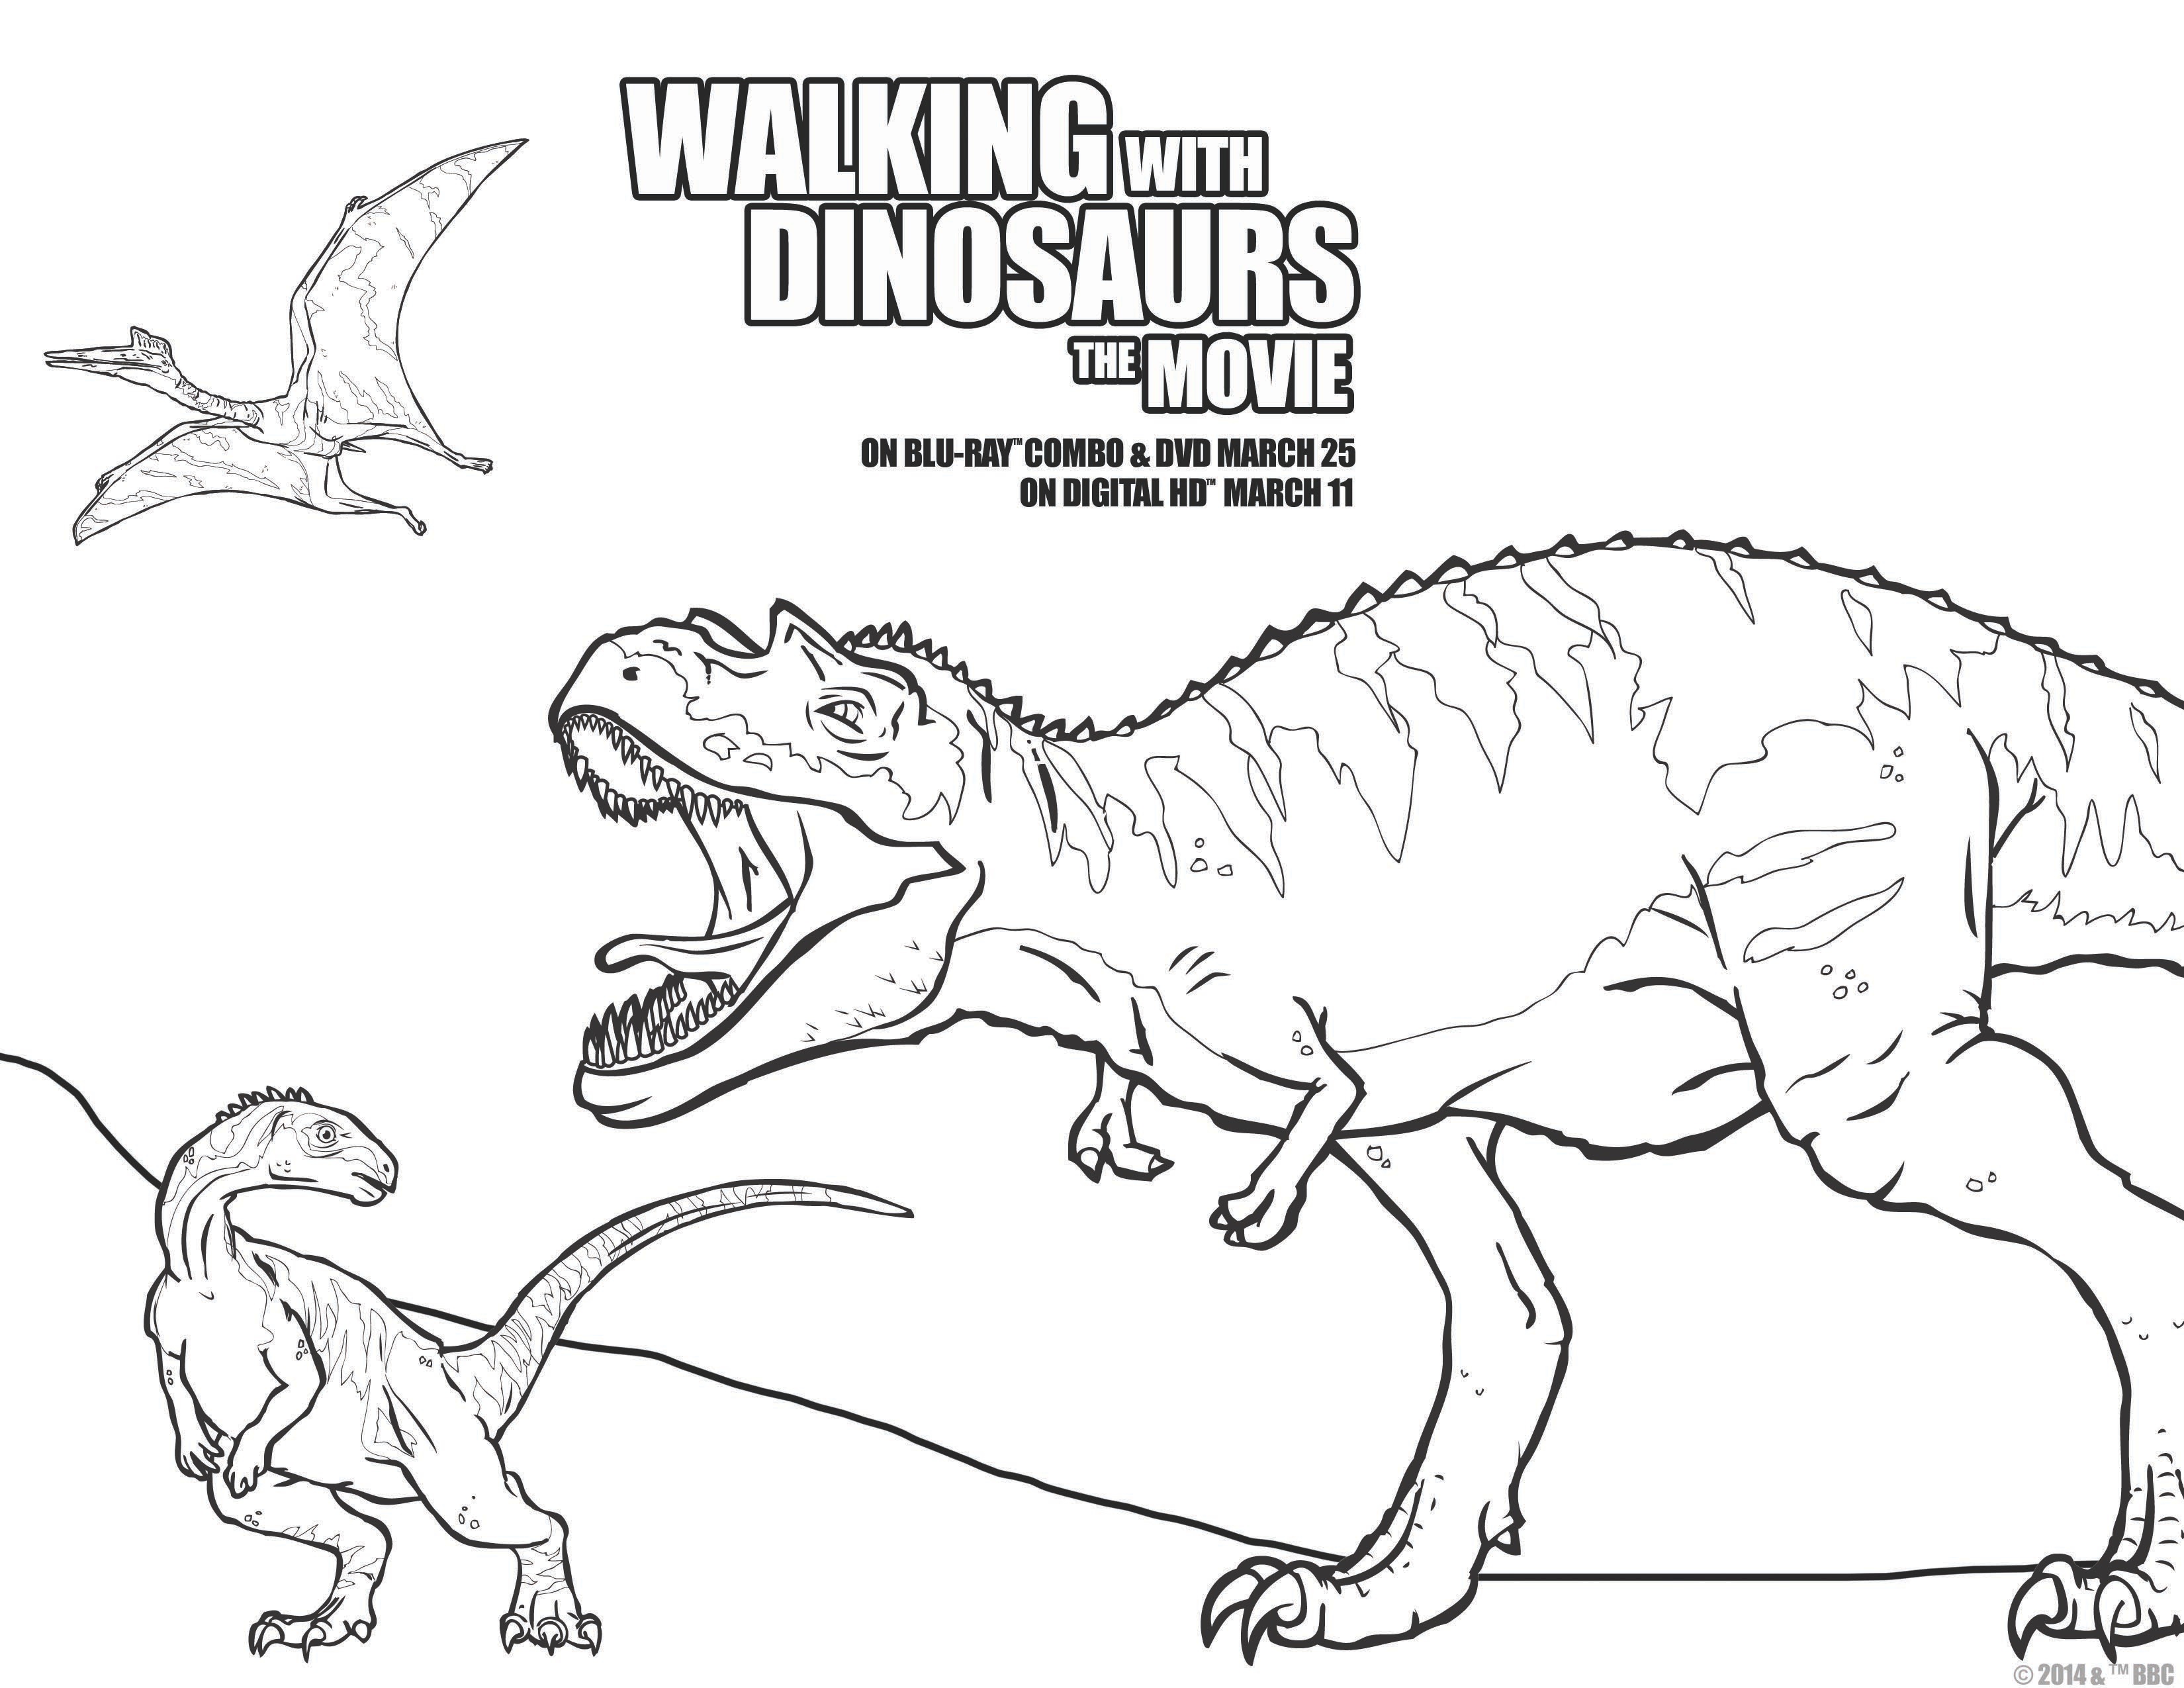 Walking With Dinosaurs Is Coming To DVD and Blu-ray ...